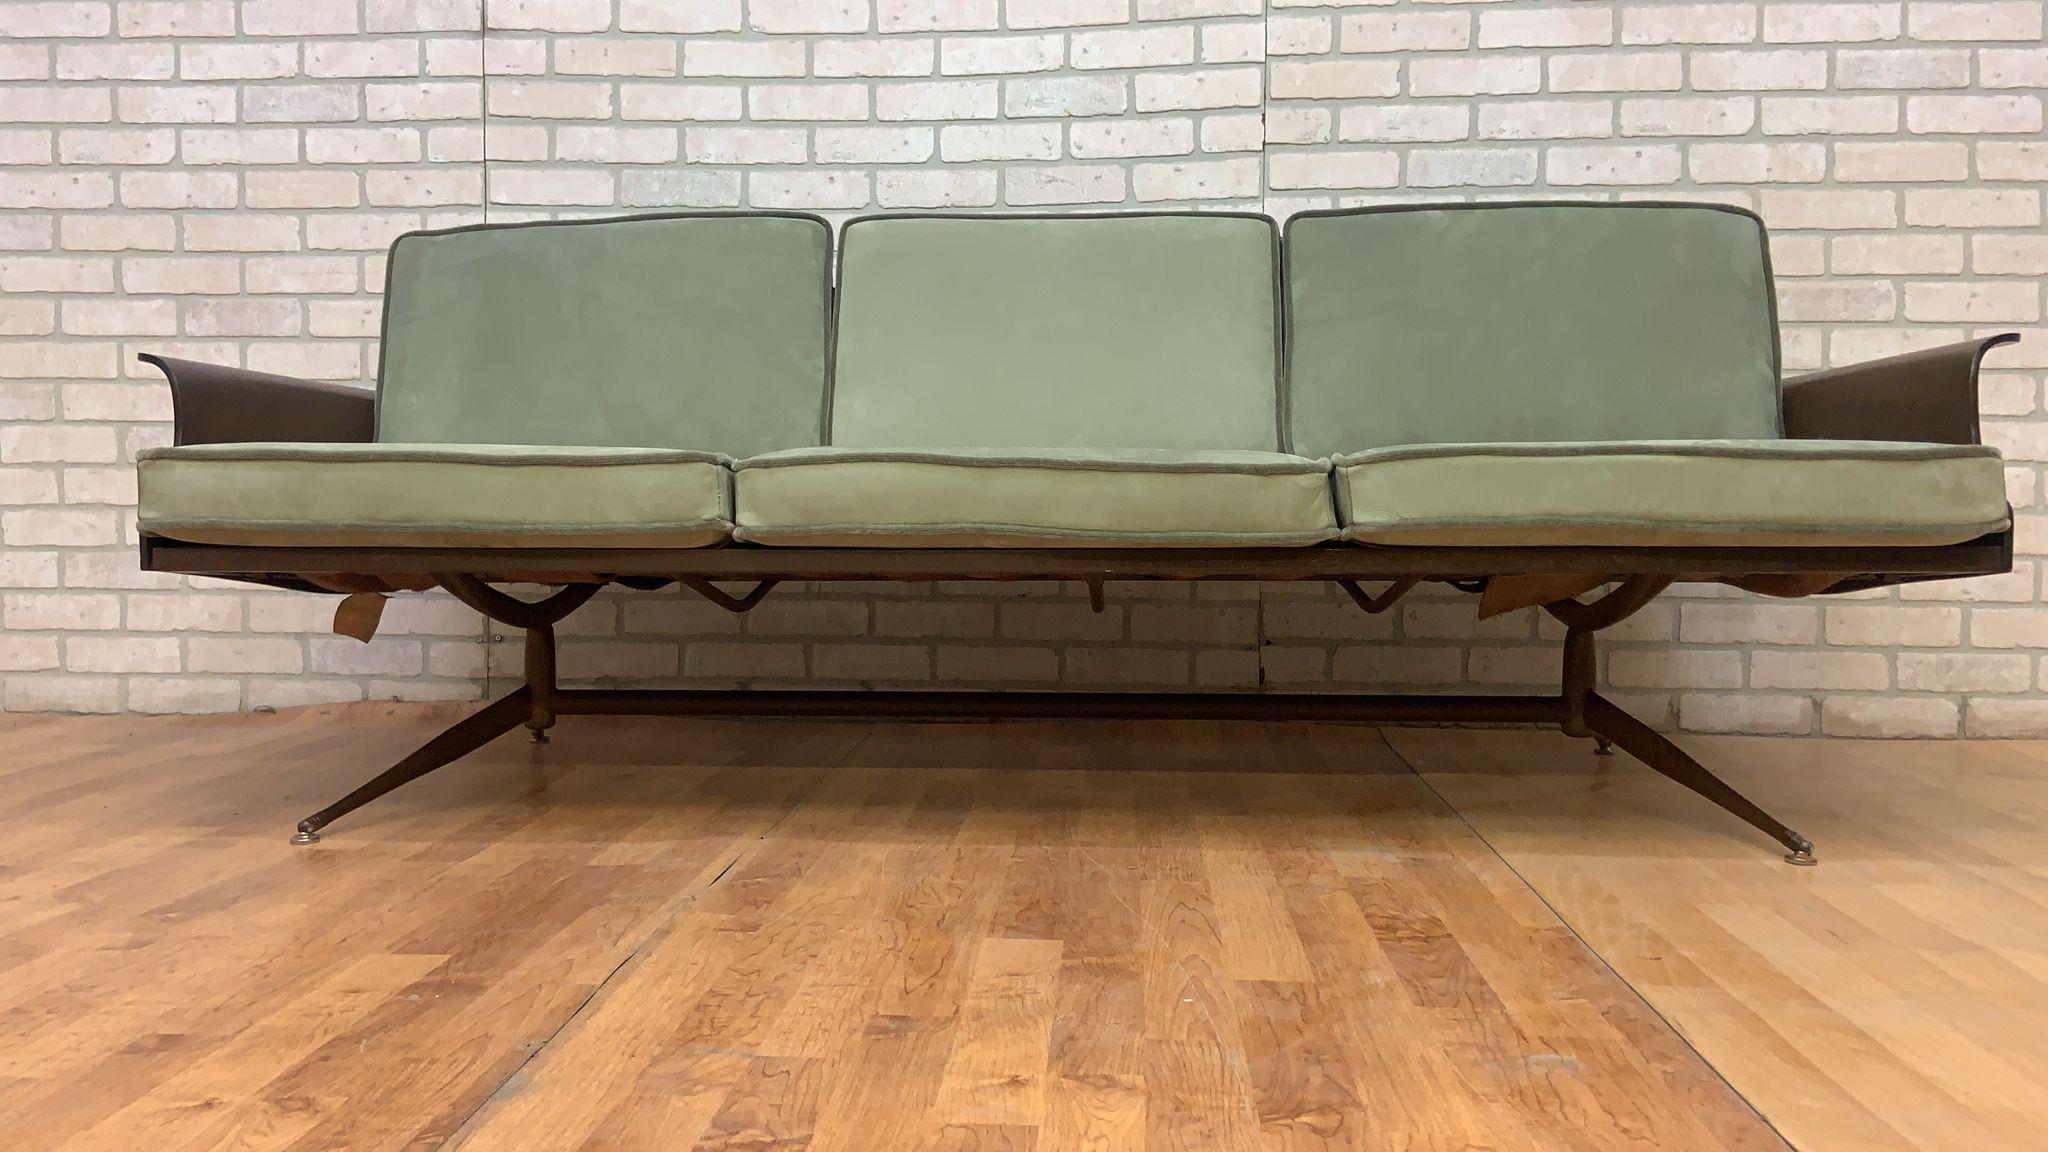 Mid Century Modern Viko Baumritter Daybed Sofa Newly Reupholstered in Holly Hunt Sage Suede with Mohair Trim

This original molded plywood and steel frame daybed/sofa is by Viko Baumritter. The Viko daybed was apart 